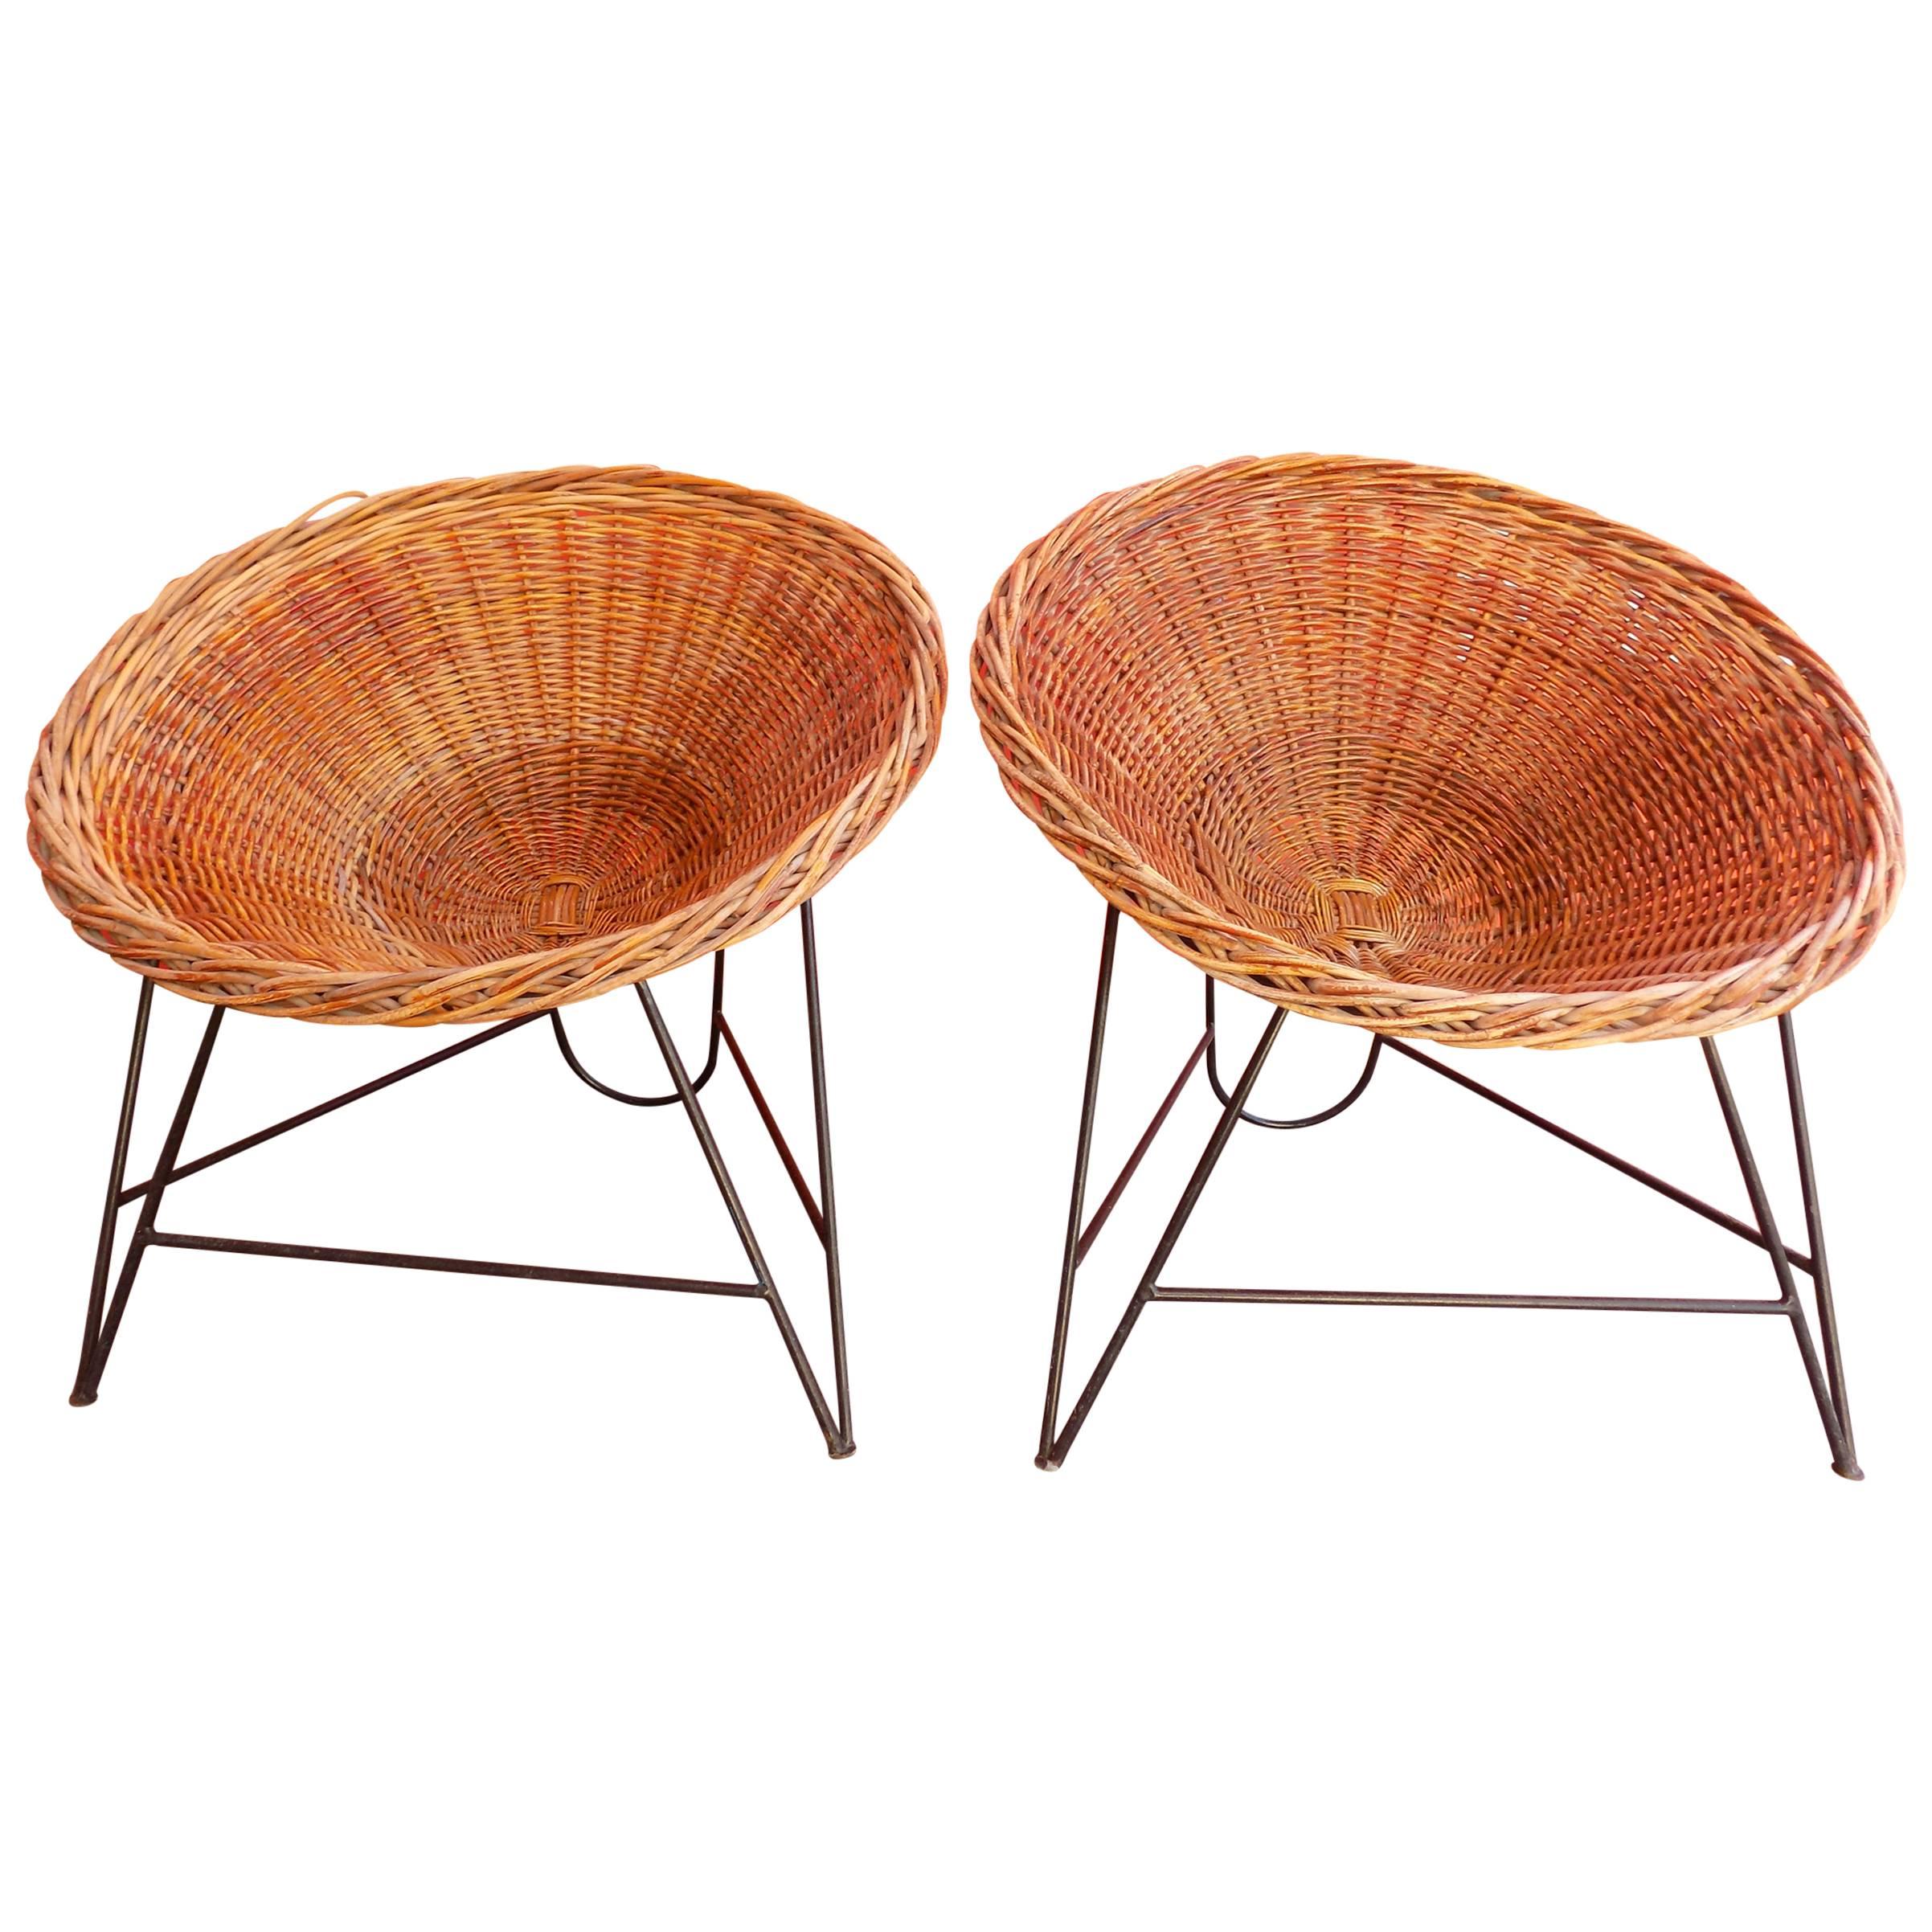 Pair of Wicker Armchair in the Taste of Janine Abraham For Sale